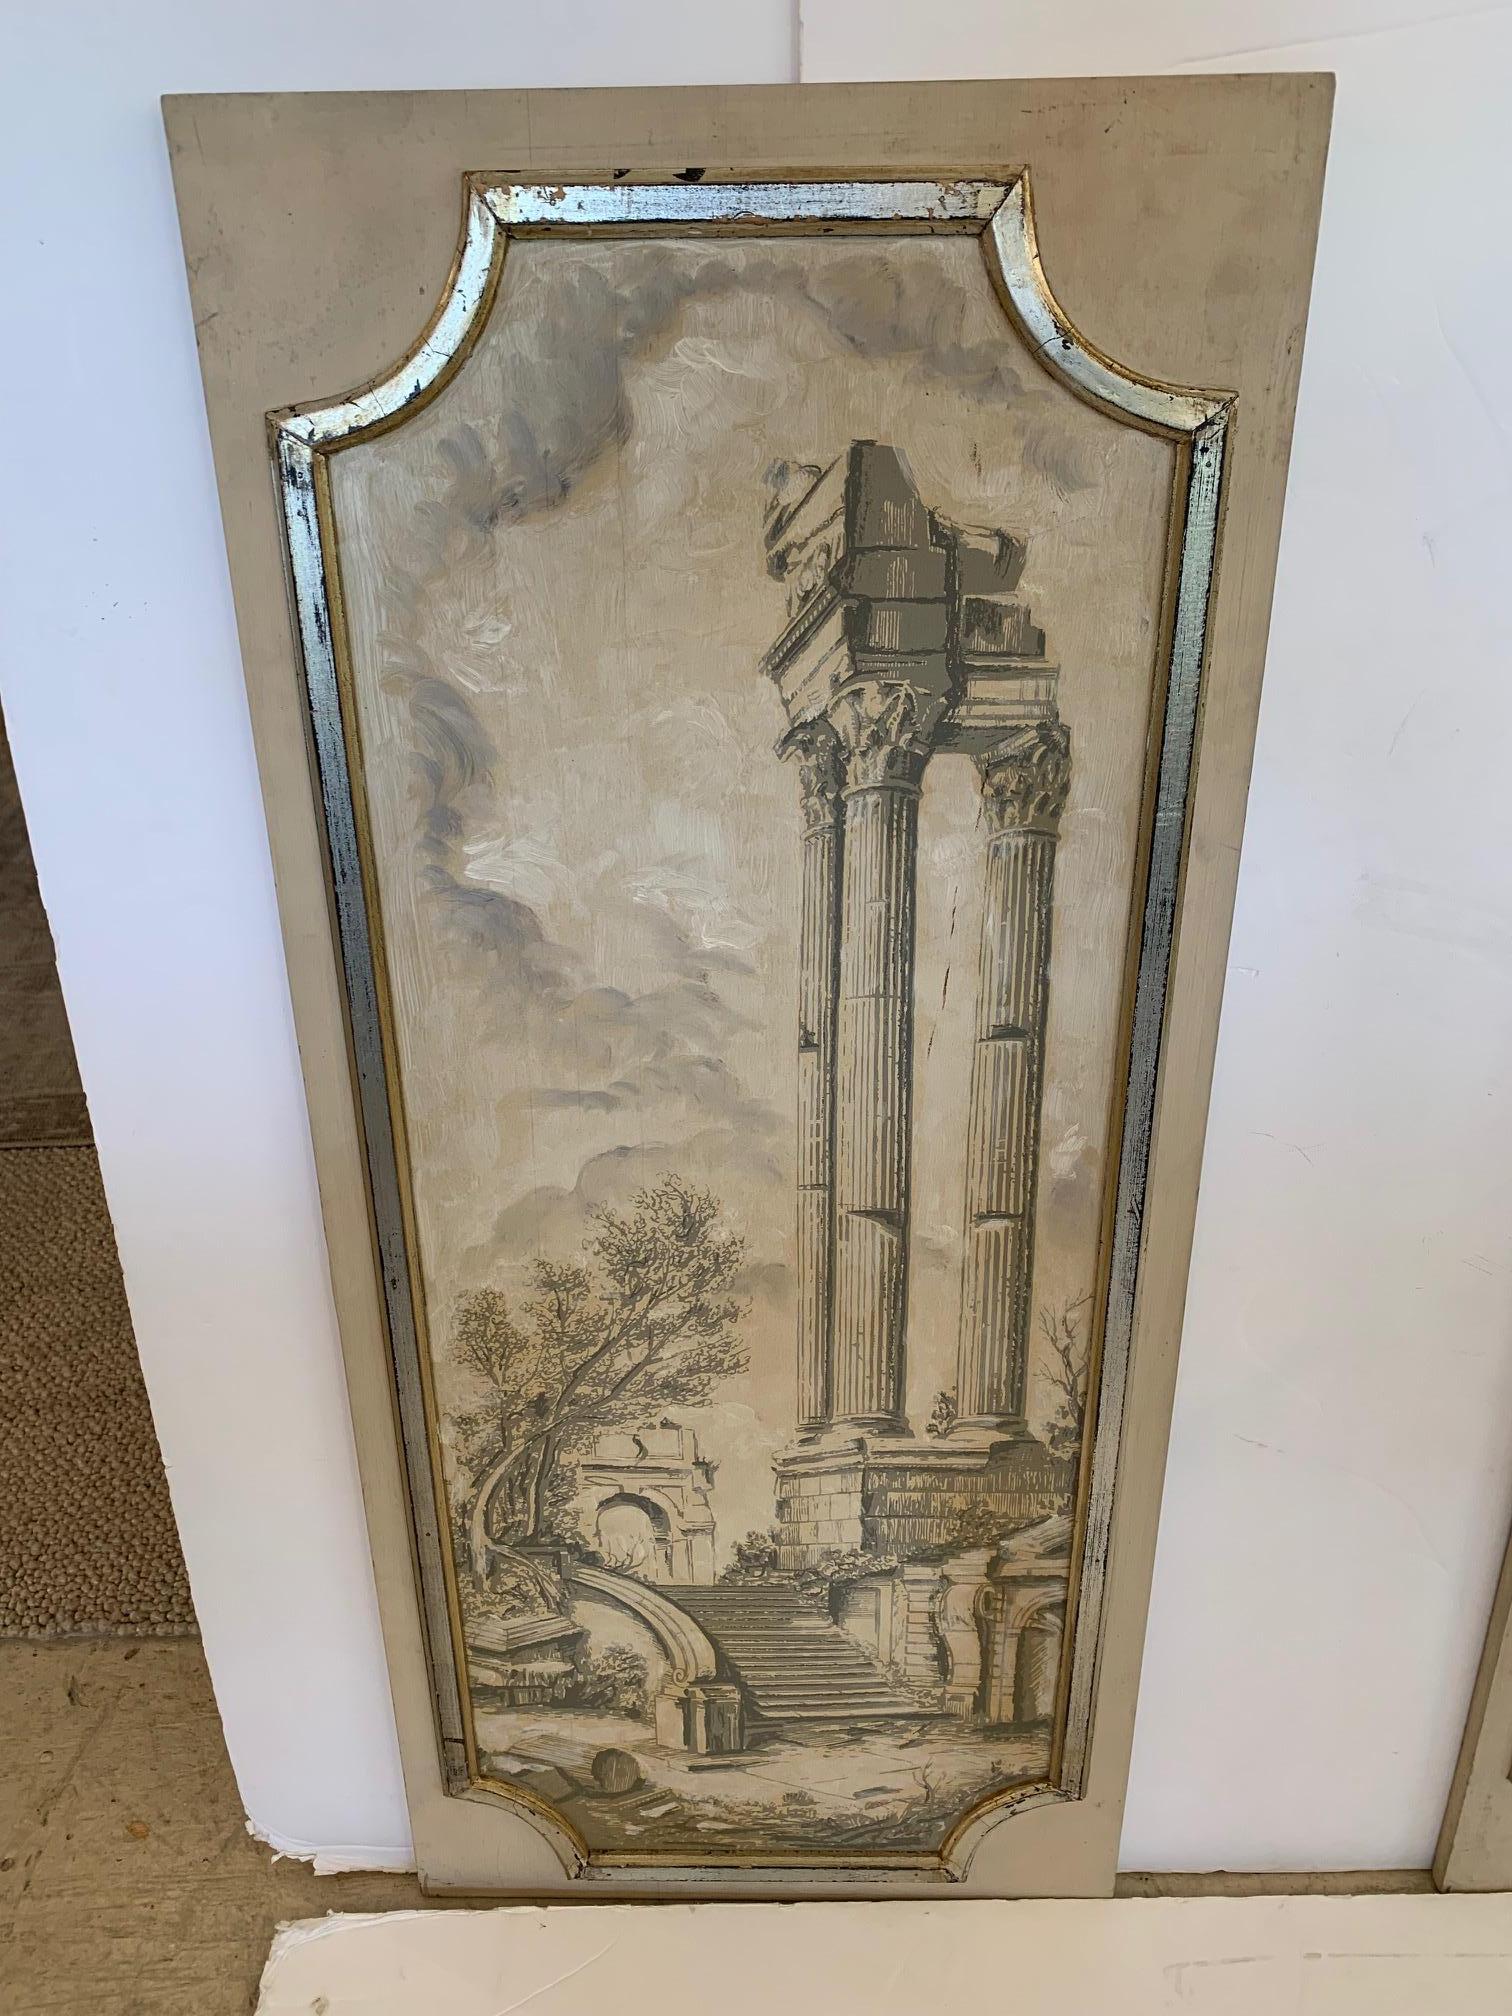 Set of four hand painted trompe l’oeil panels depicting four neoclassical architectural scenes with muted colors and framed in aged wood and silver gilt moldings. Measurements for each panel below.
 